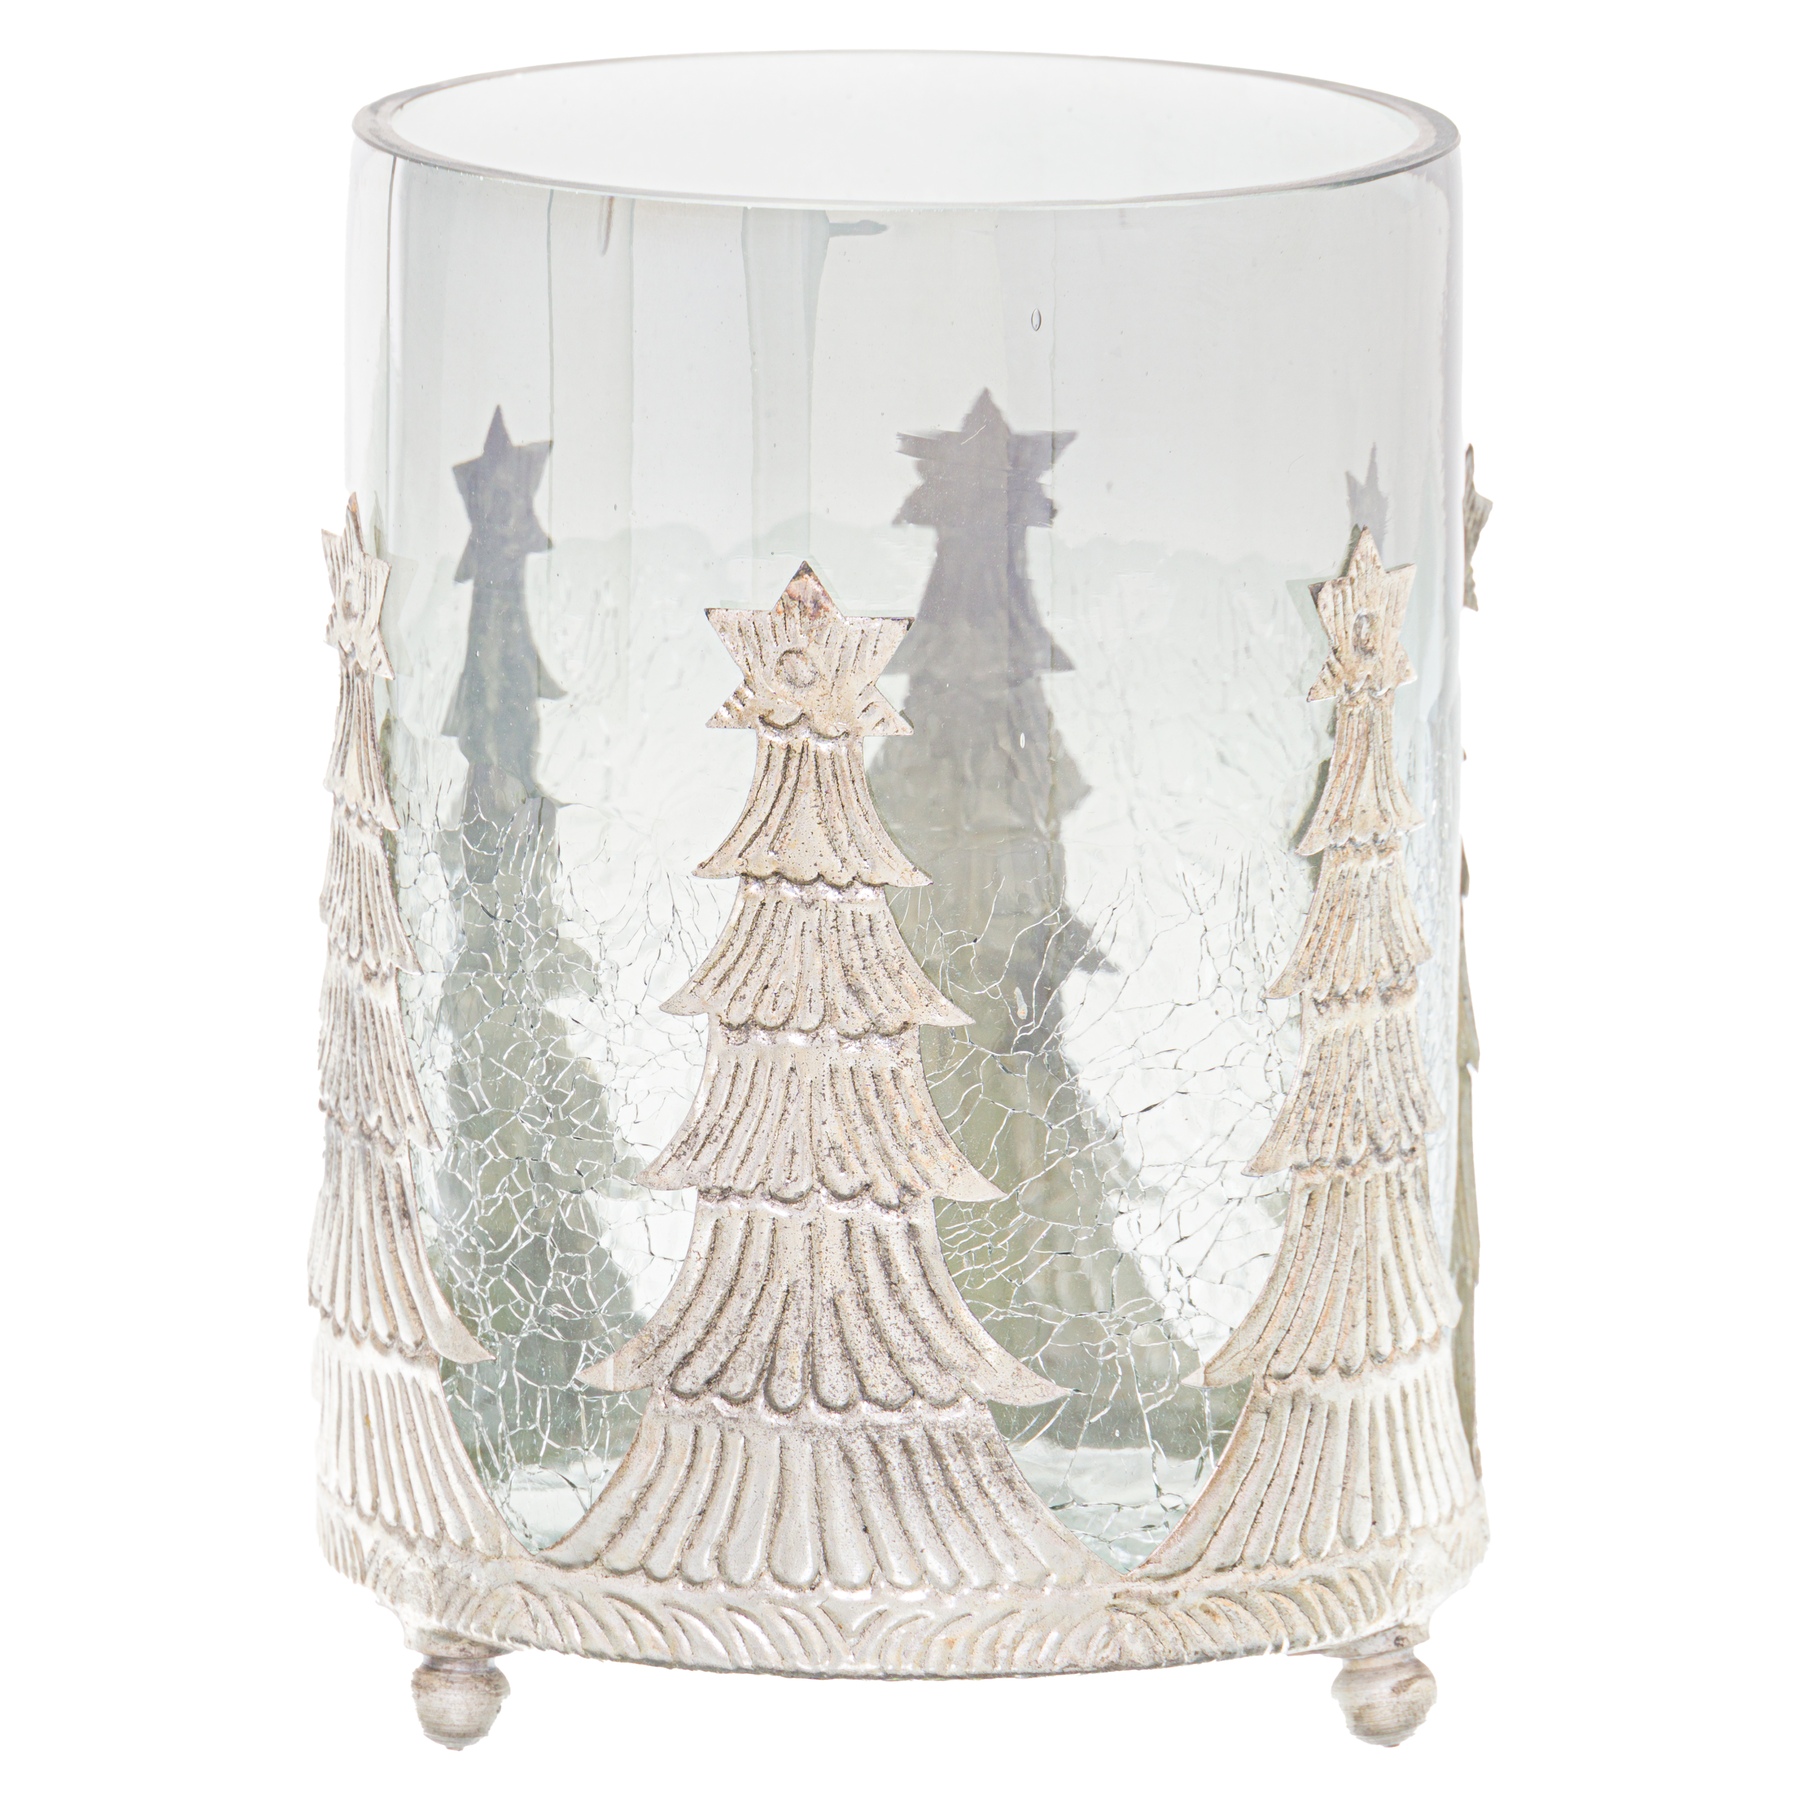 Noel Collection Medium Christmas Tree Crackled Candle Holder - Image 1